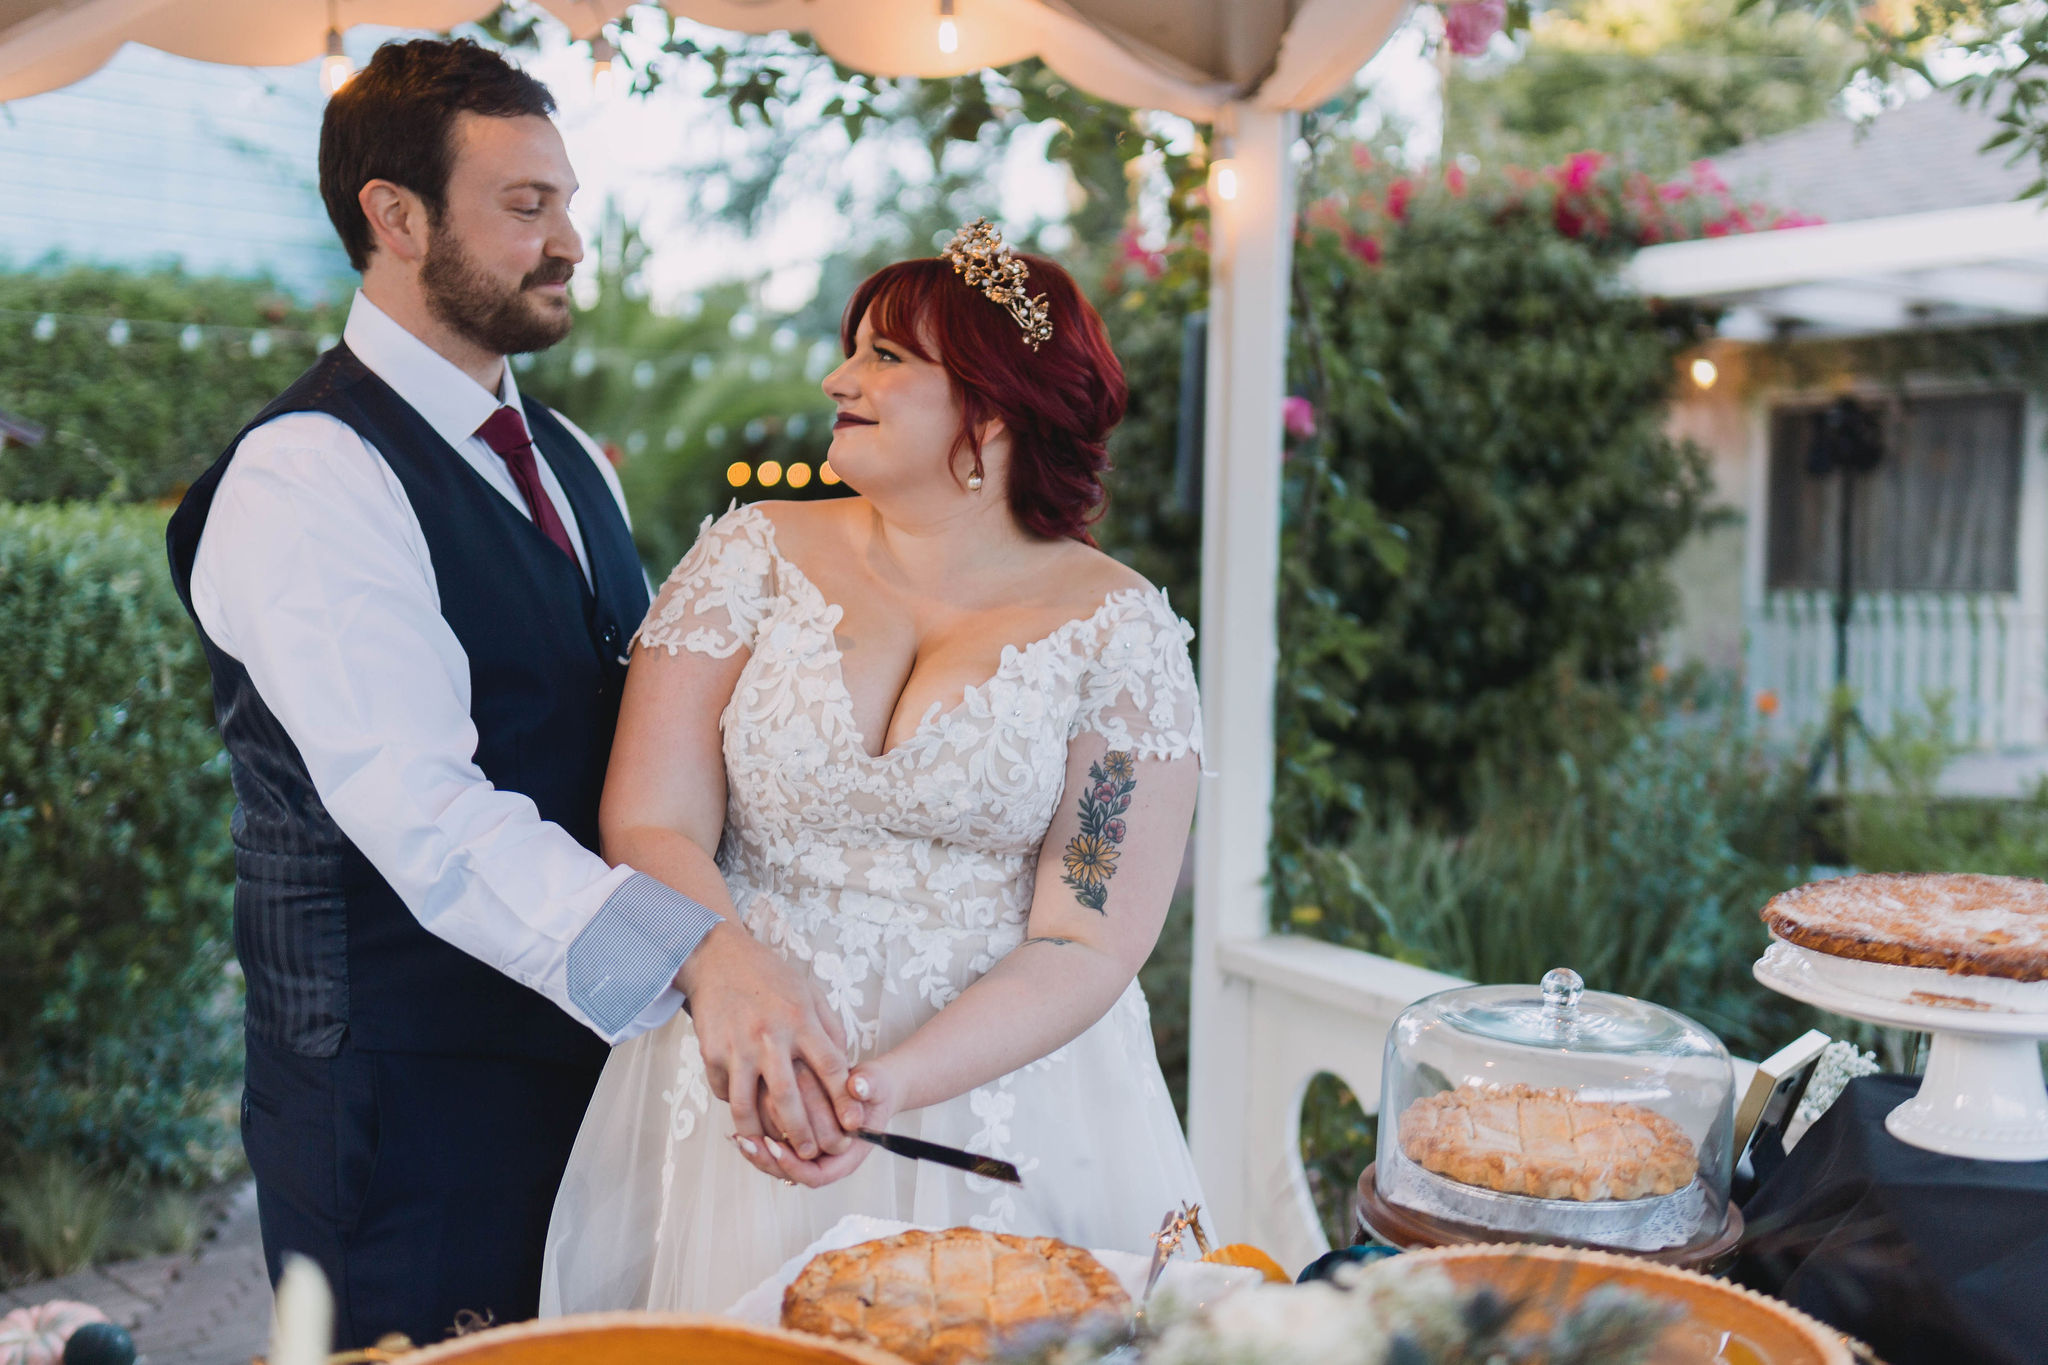 Bride and groom cut their dessert during reception